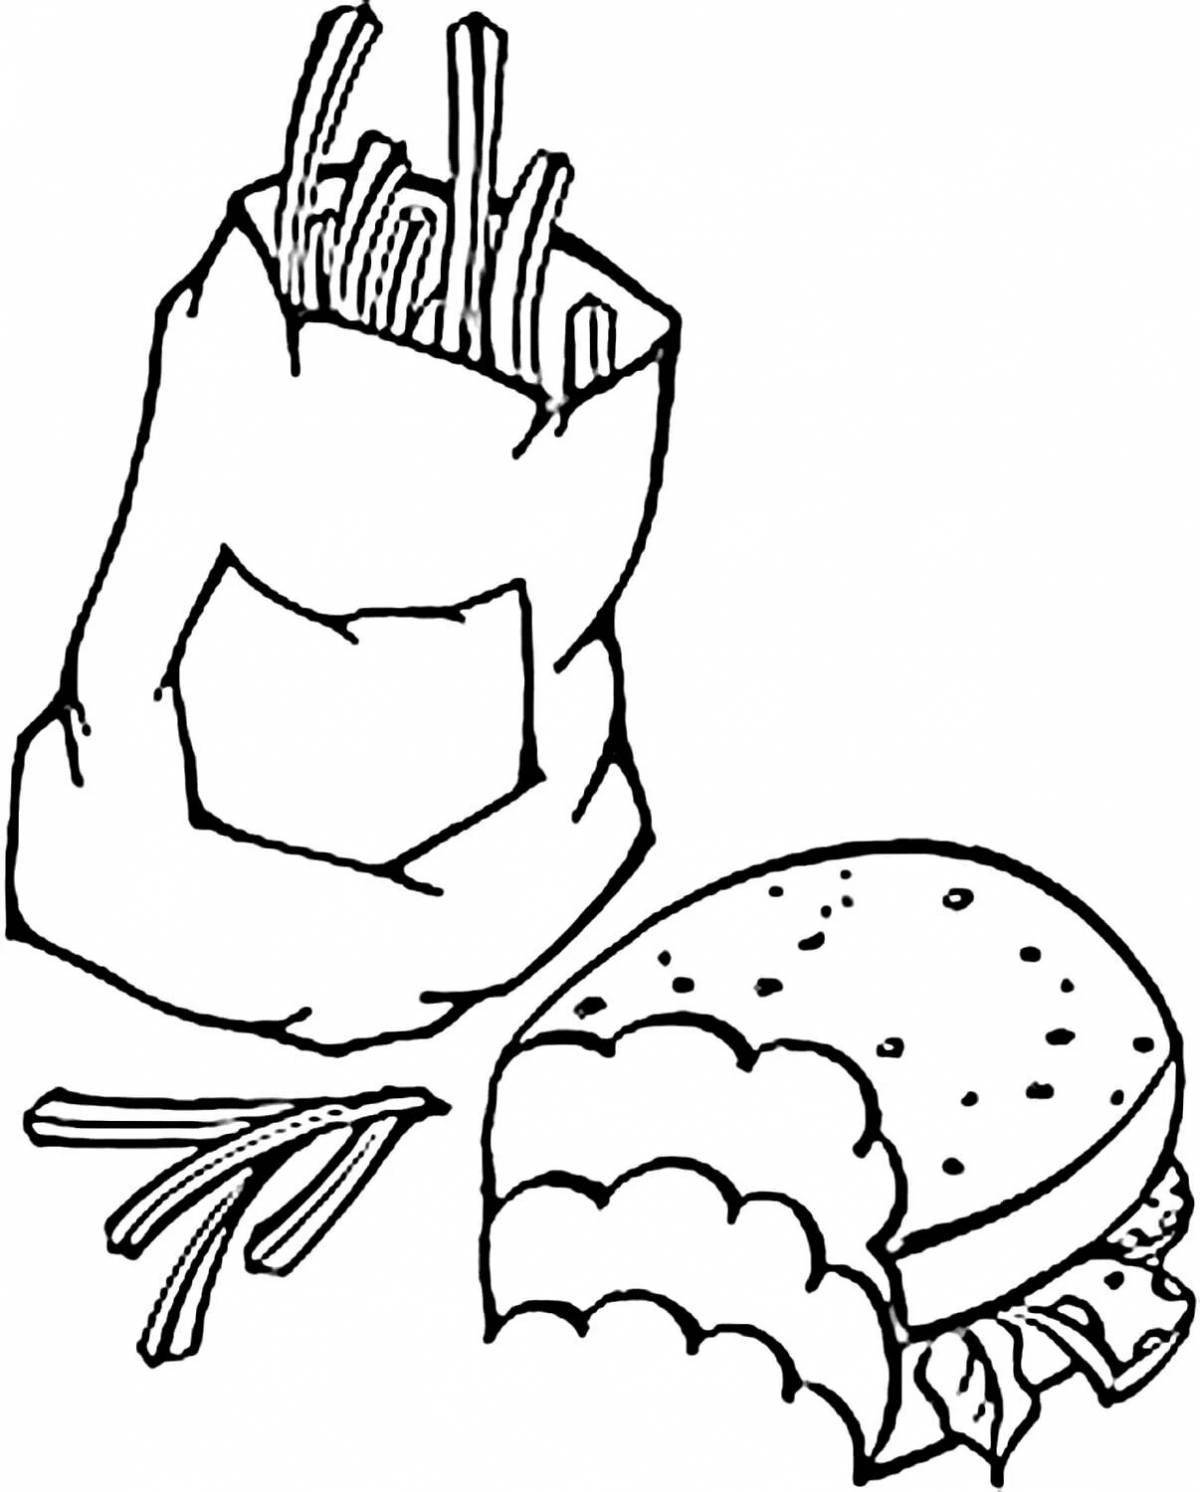 Adorable mcdonald's food coloring page